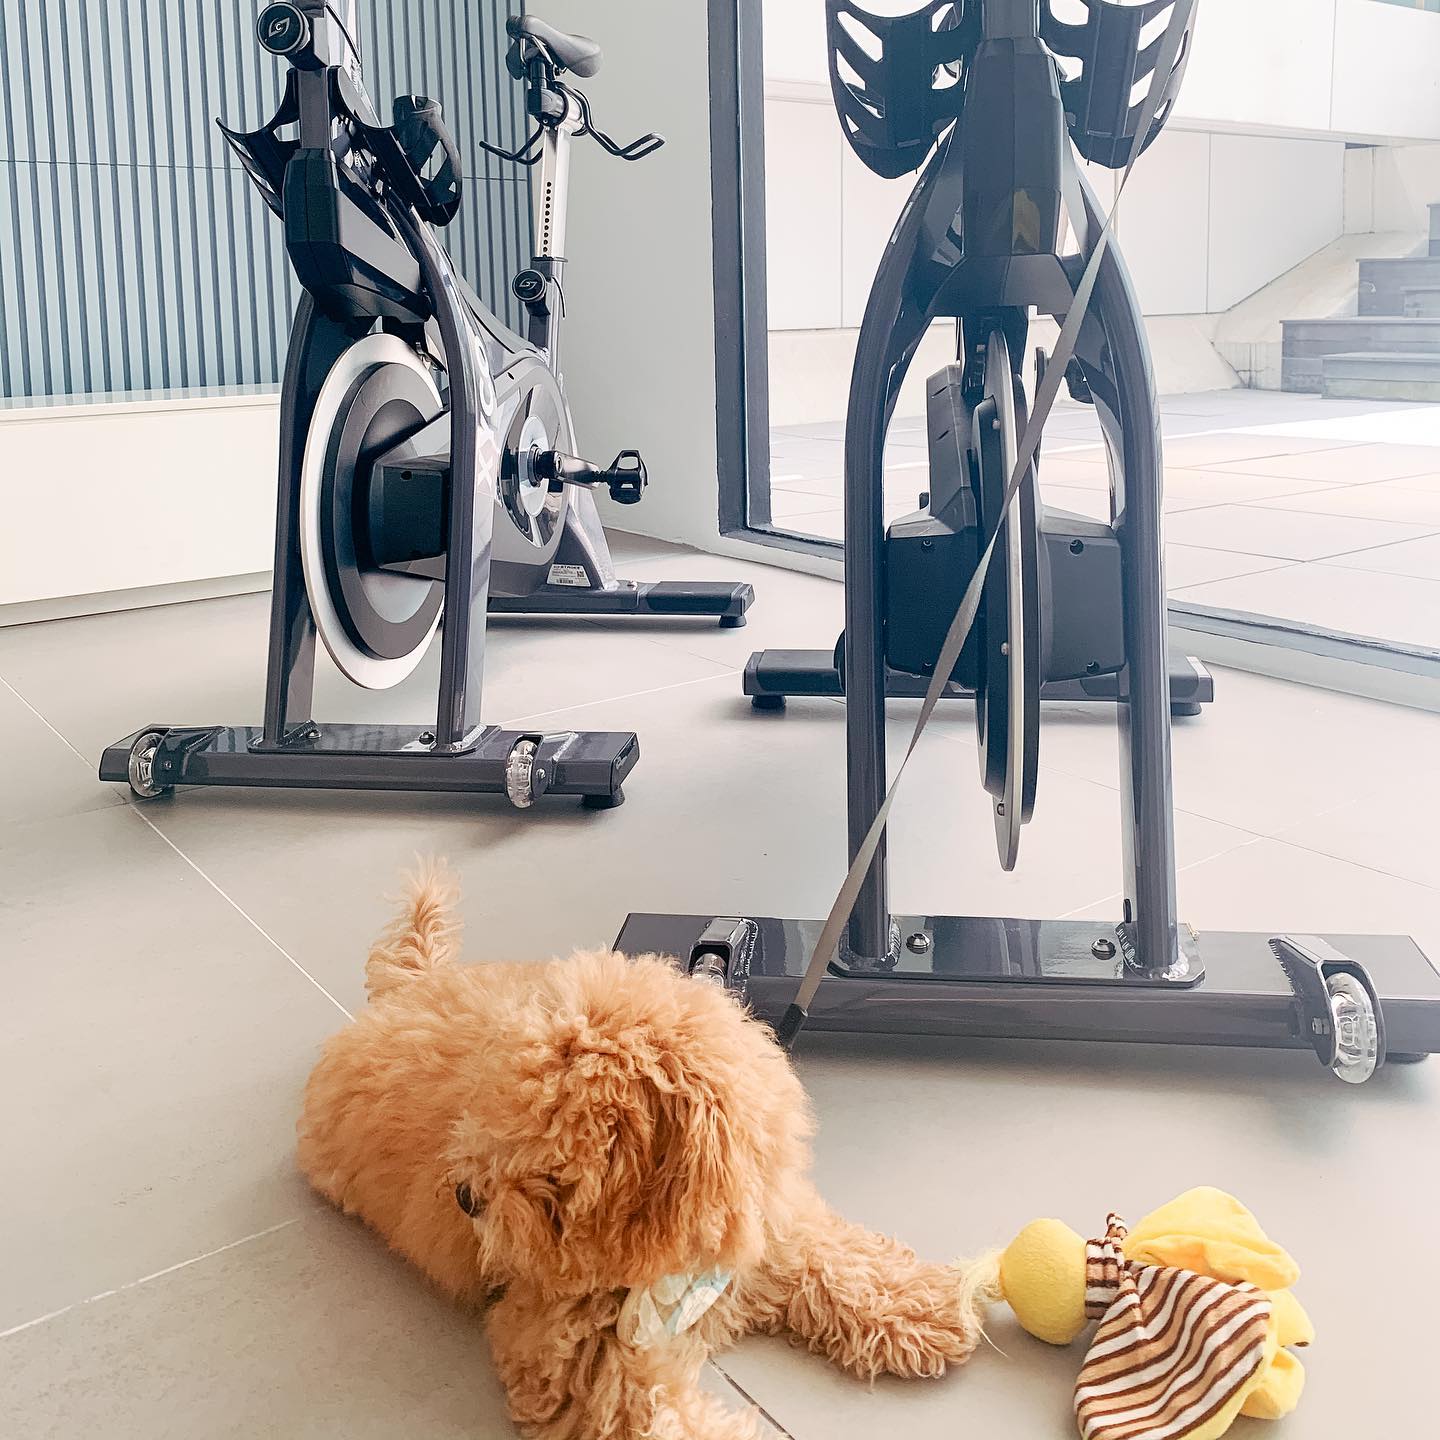 spin classes singapore